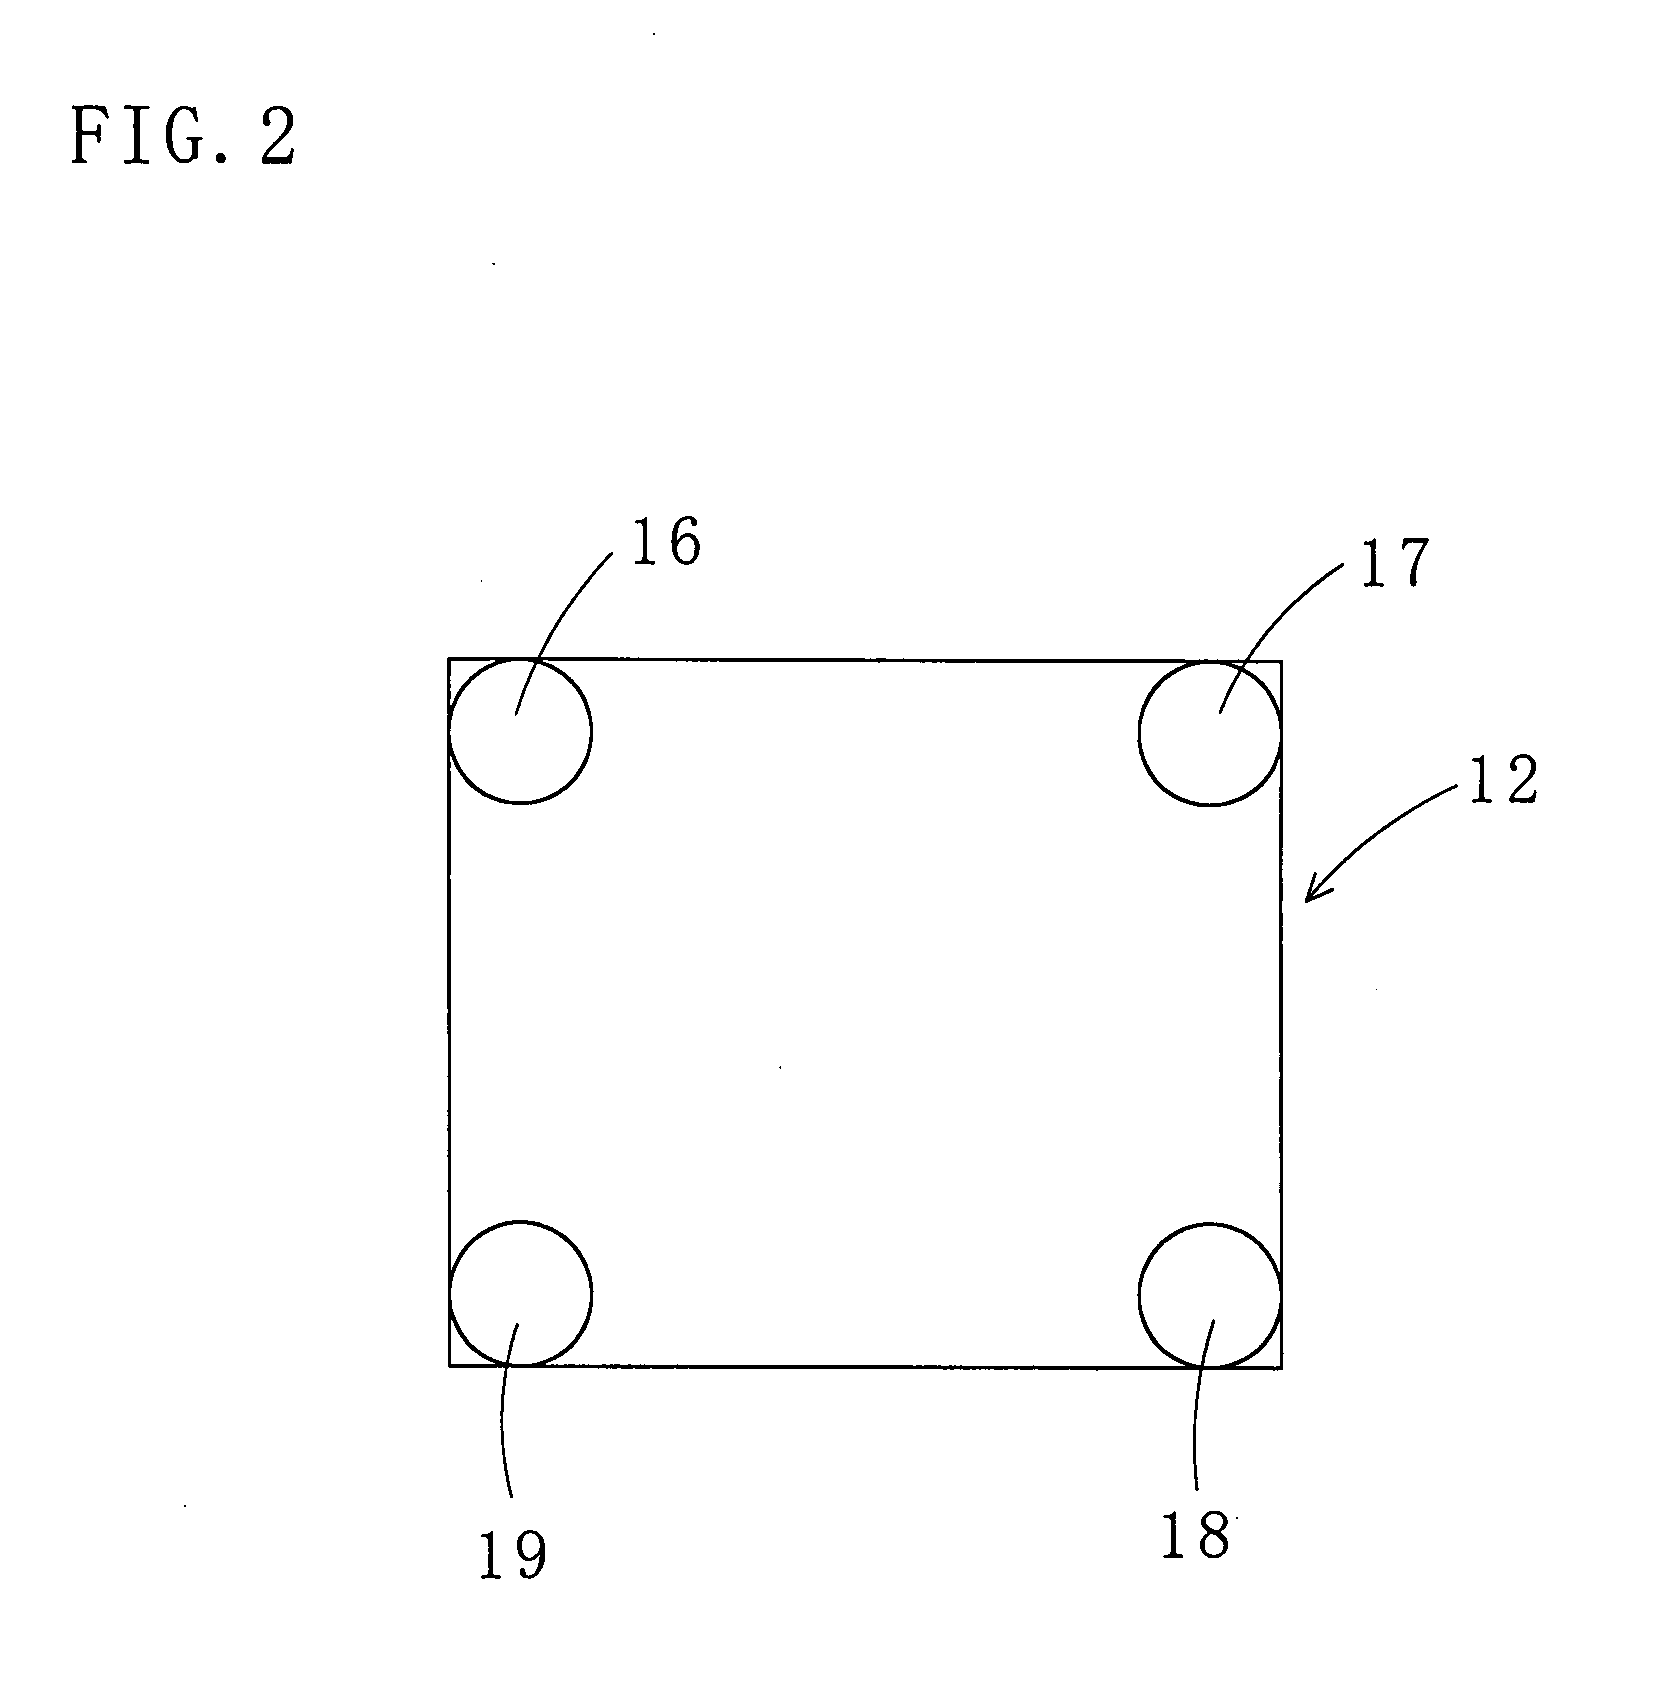 Non-Contact Conveying Device Using Superconducting Magnetic Levitation